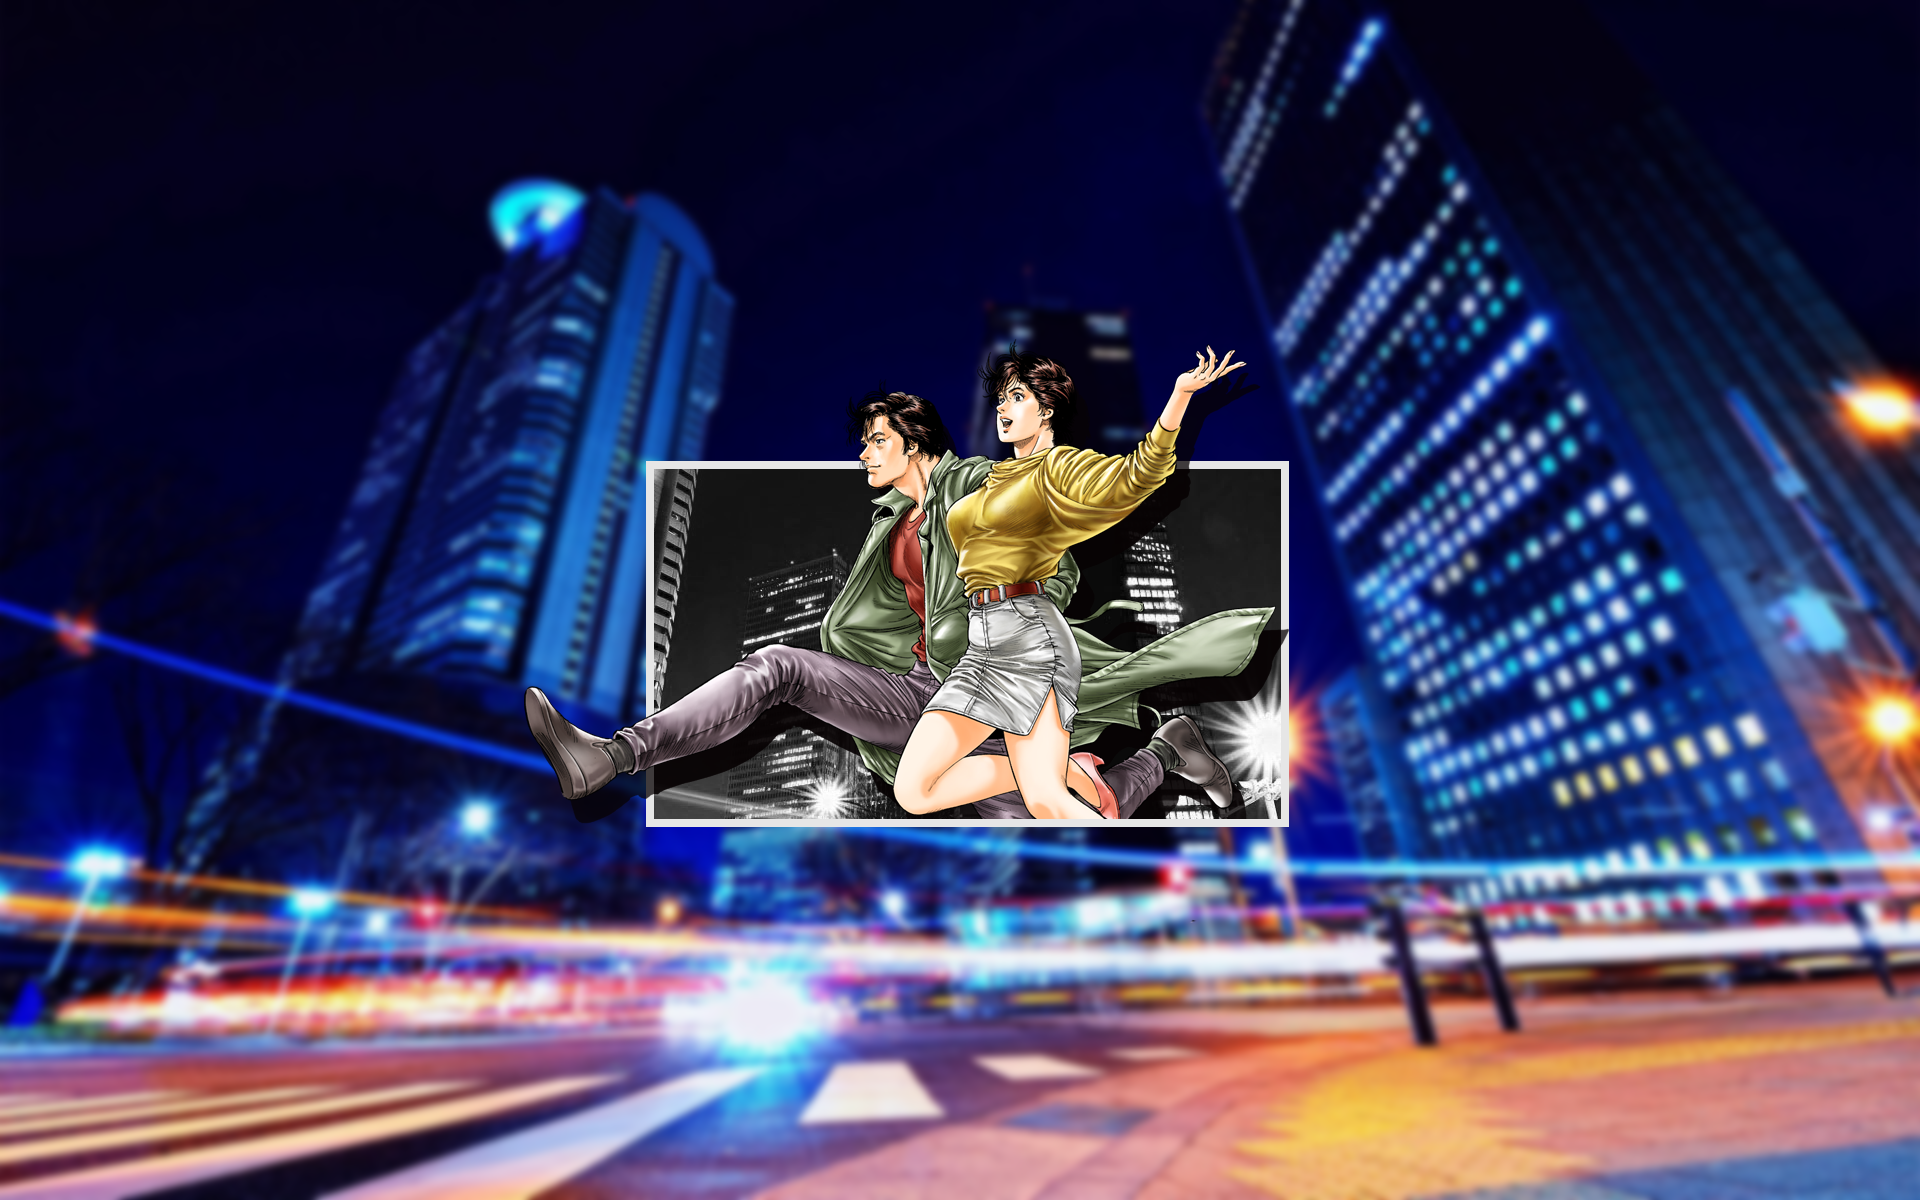 City Hunter Anime Piture In Picture Anime Girls Picture In Picture Wallpaper Resolution 19x10 Id Wallha Com